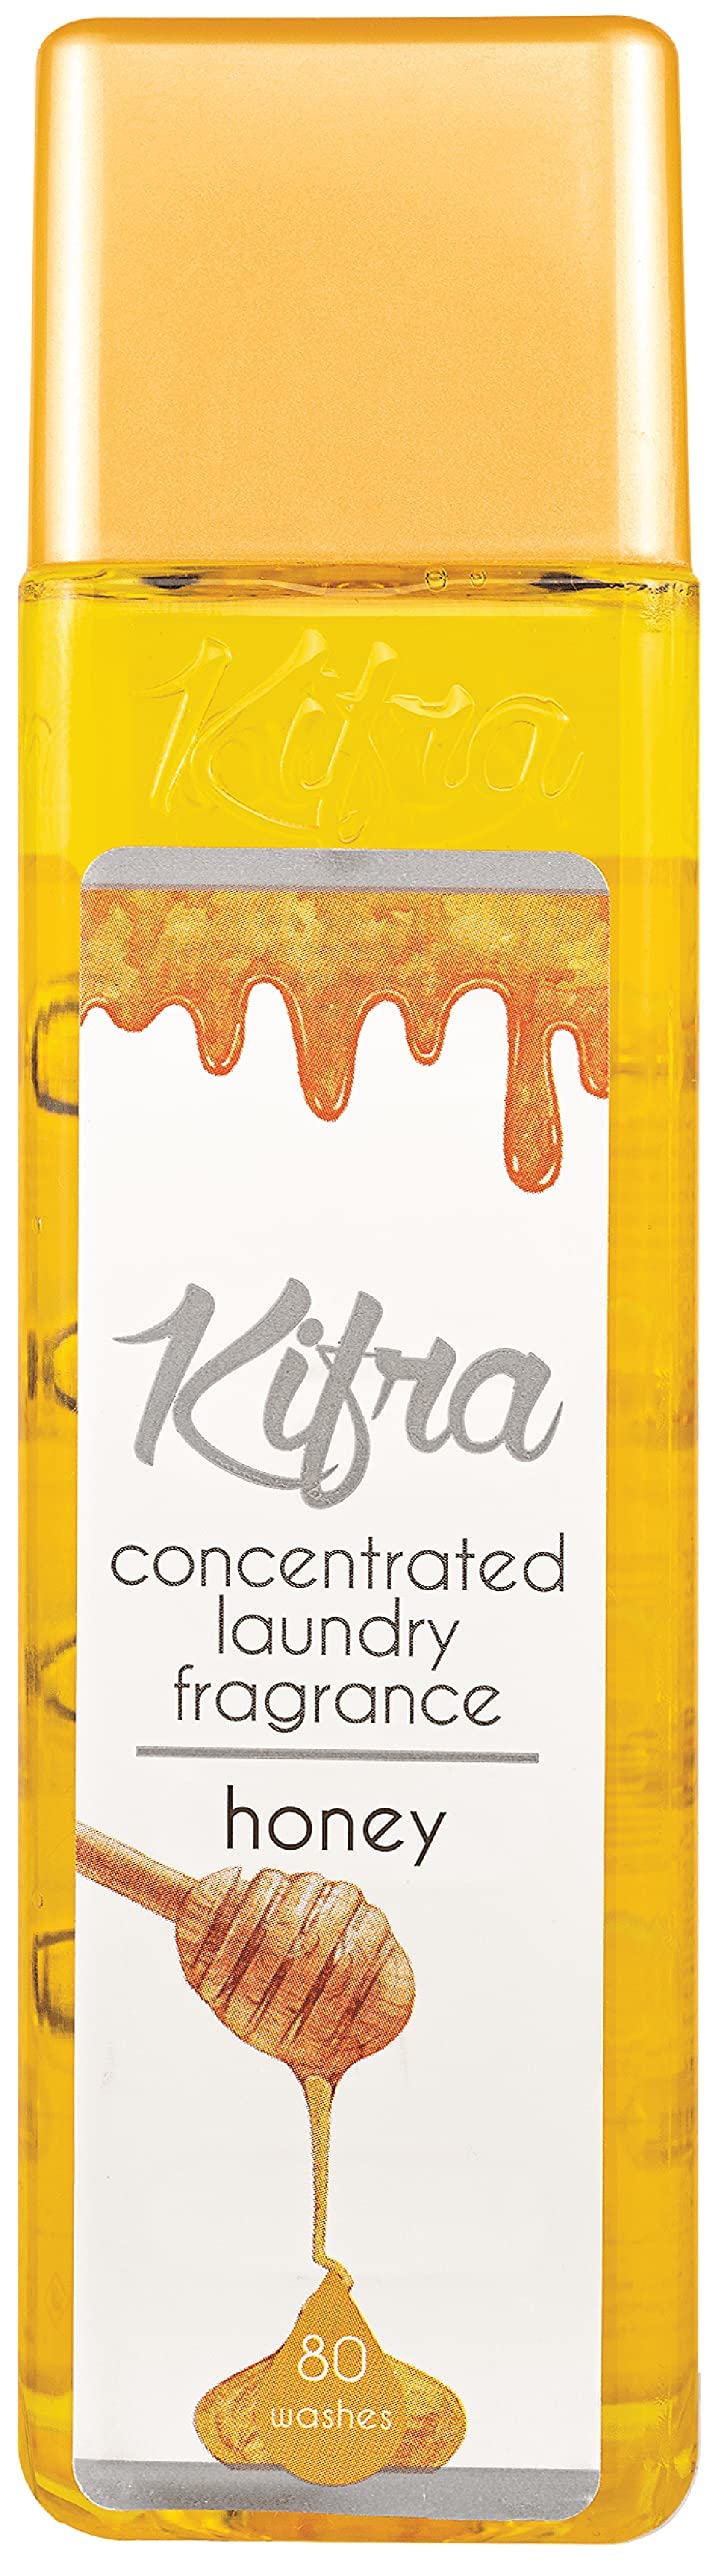 KIFRA HONEY Concentrated Laundry Fragrance 6.76 Fl Oz 200ml 80